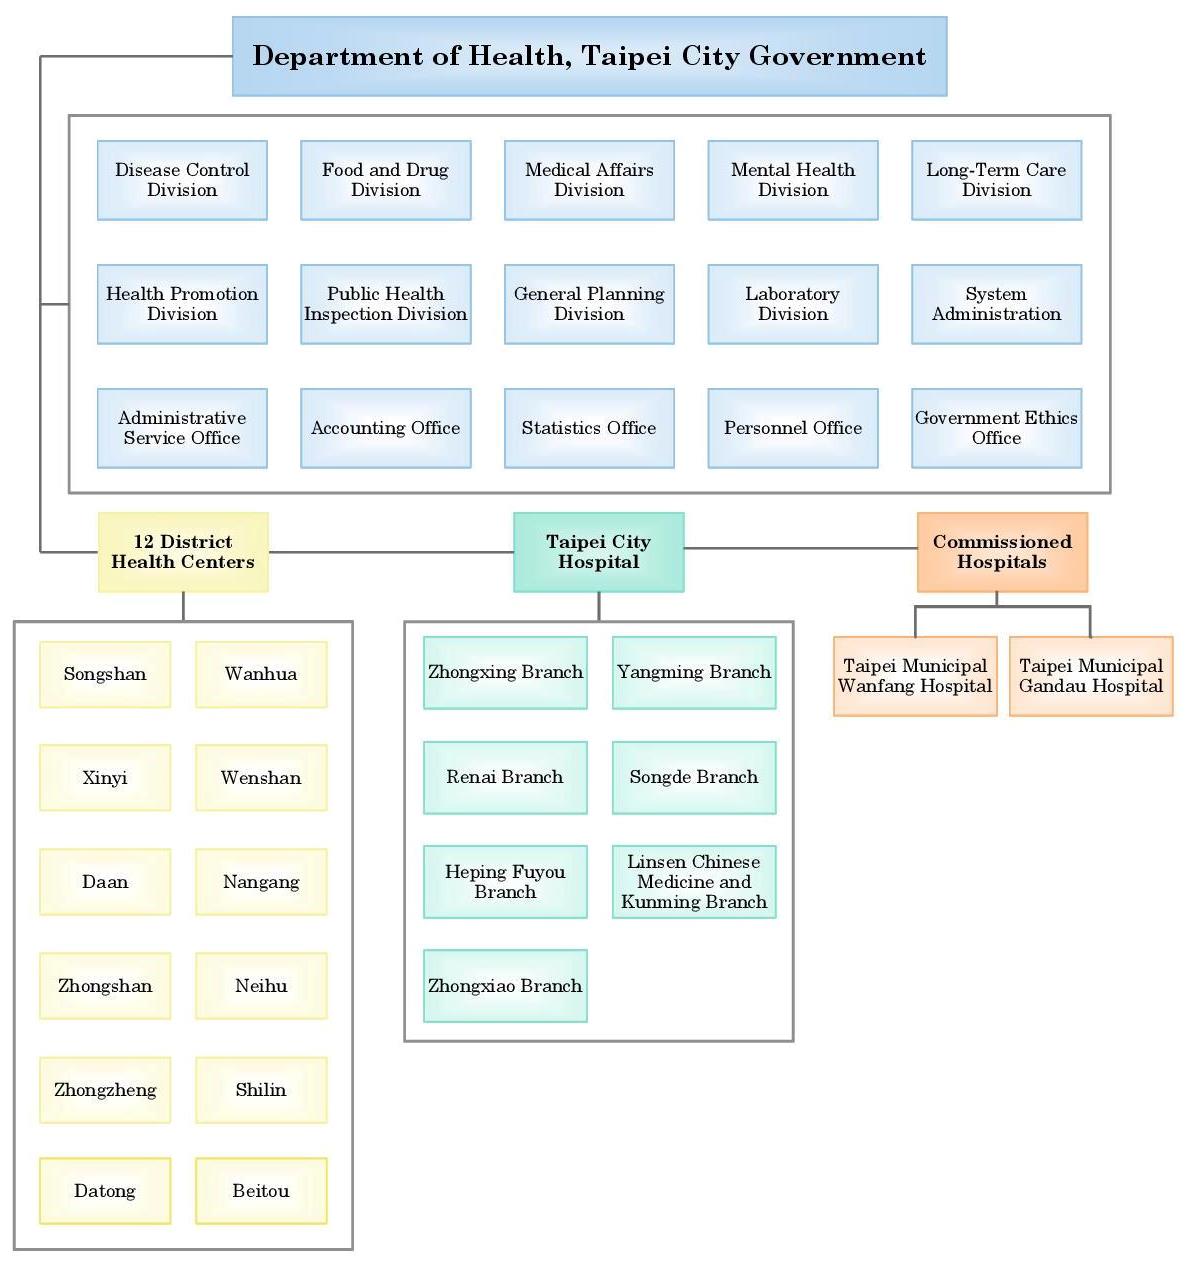 The organization structure of Department of Health, Taipei City Government comprises 9 divisions and 6 offices. Divisions are set to manage disease control, food and drug, medical affiars, mental health, long-term care, health promotion, public health inspection, general planning, and laboratory. Offices are to manage system administration, administraive service, accounting, statistics, personnel and government ethics. 